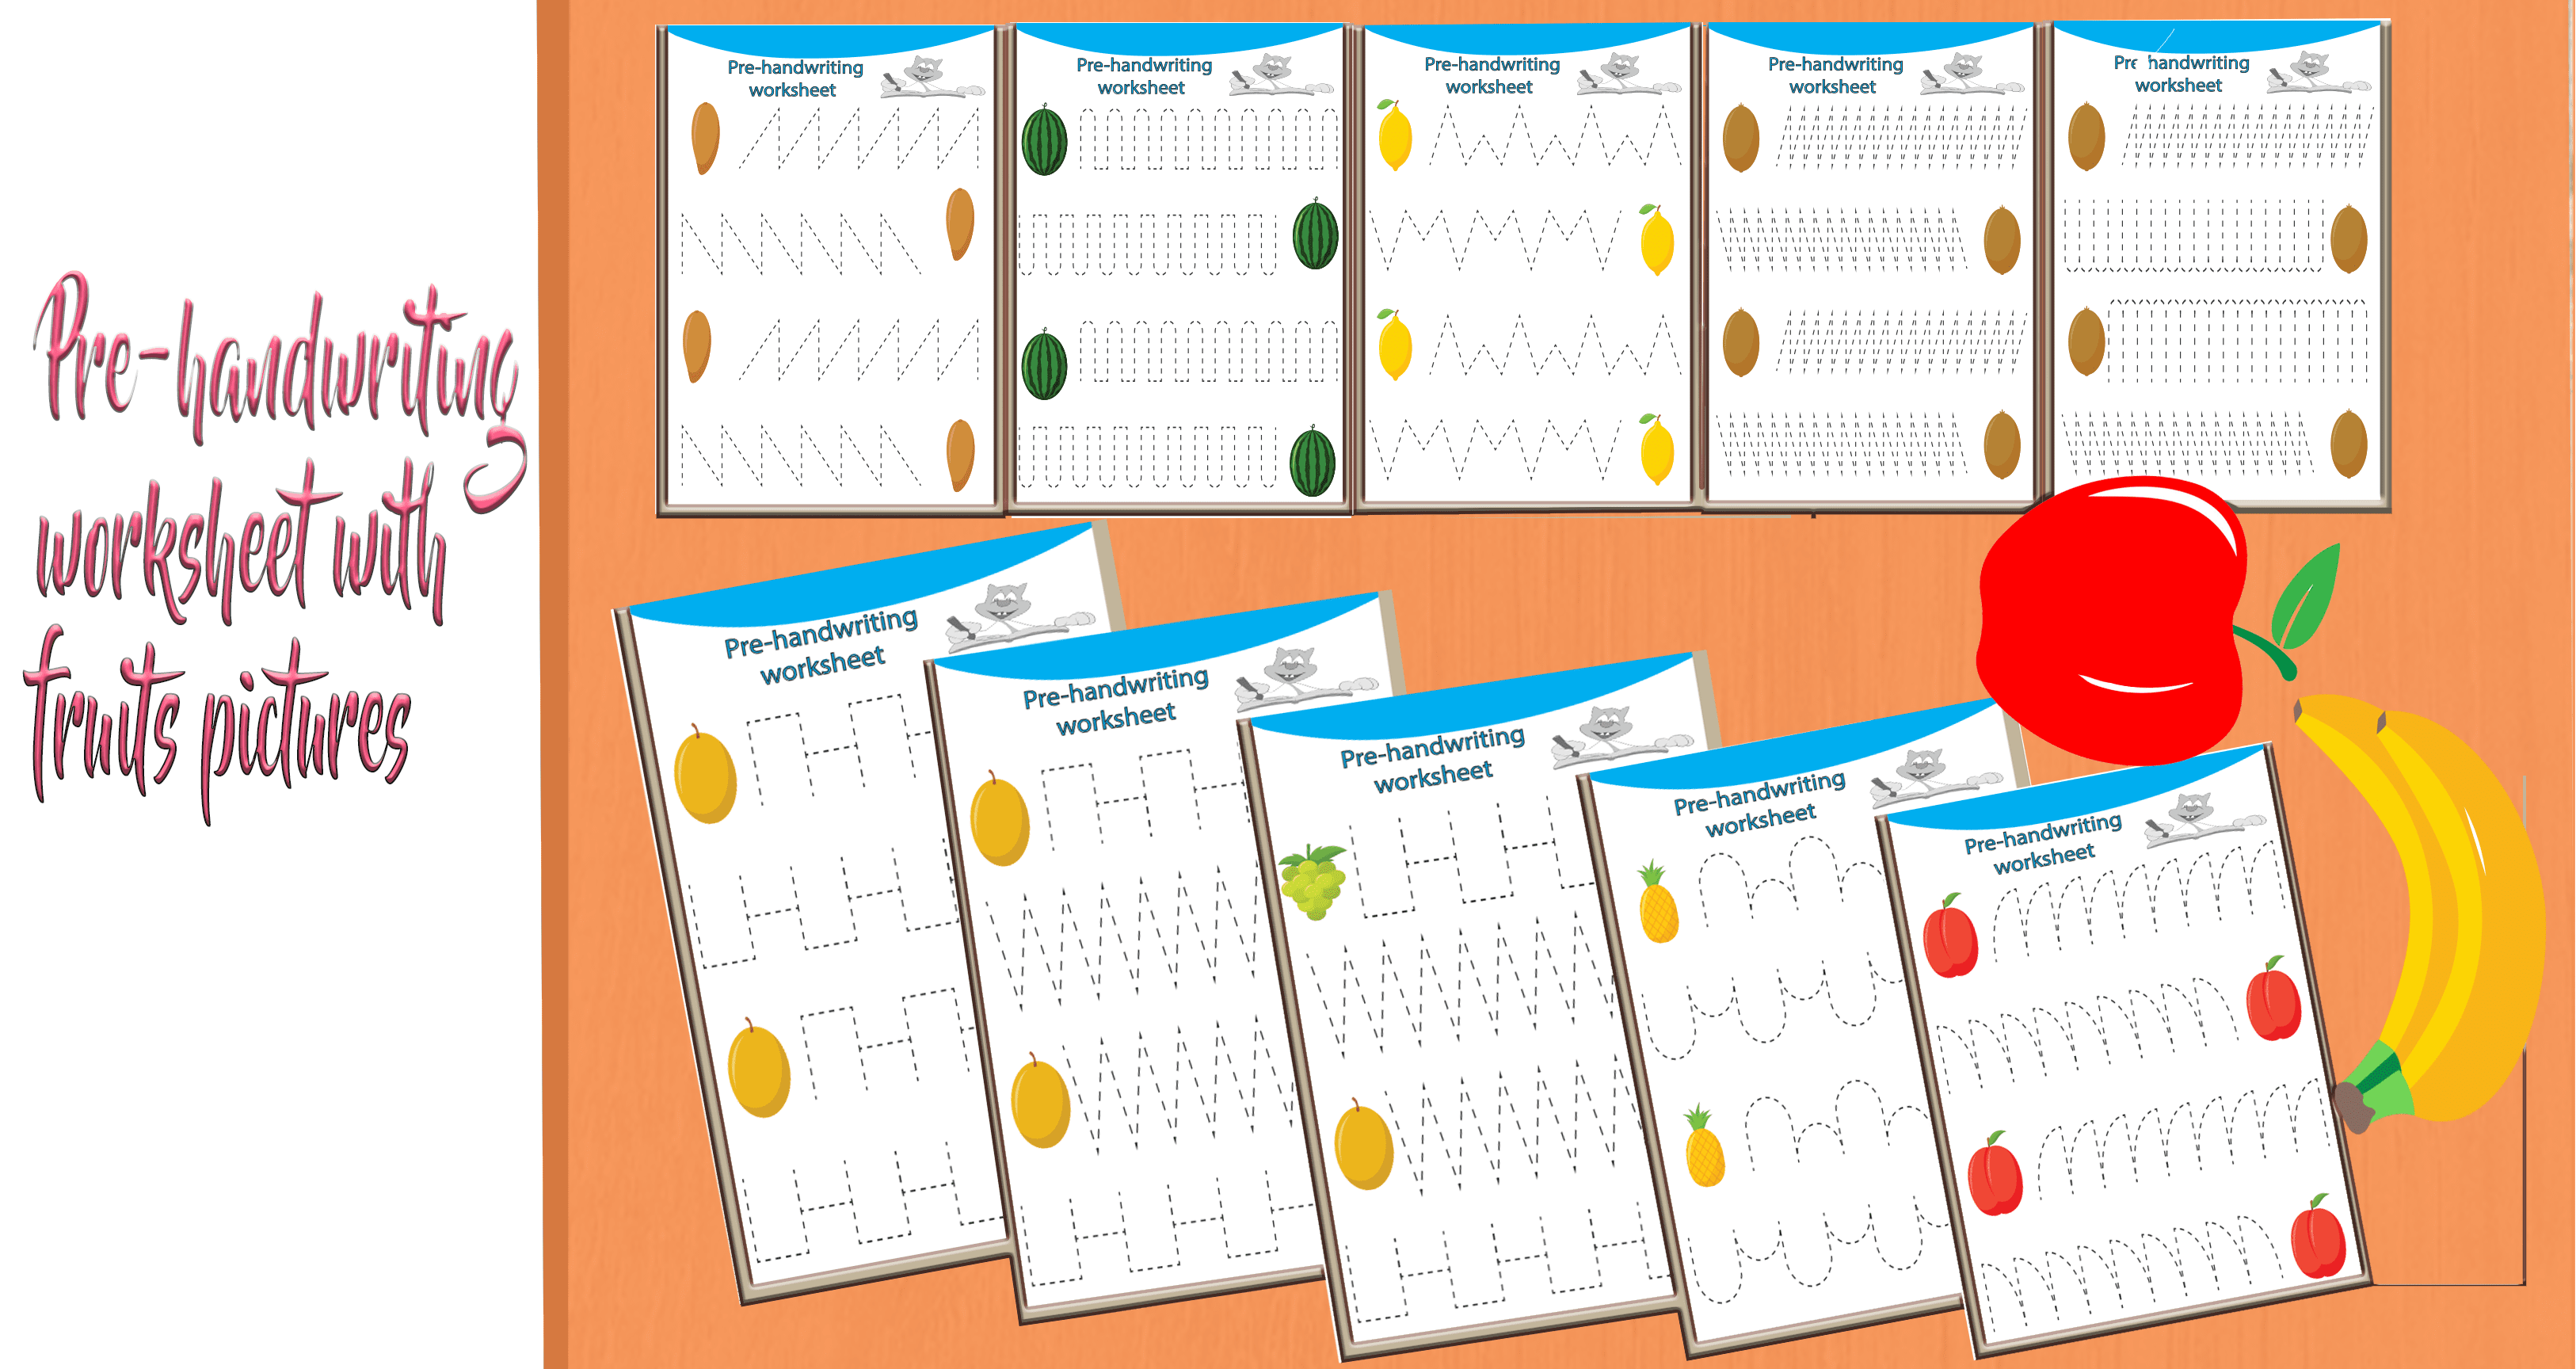 PRE-HANDWRITING WORKSHEETS WITH PICTURES